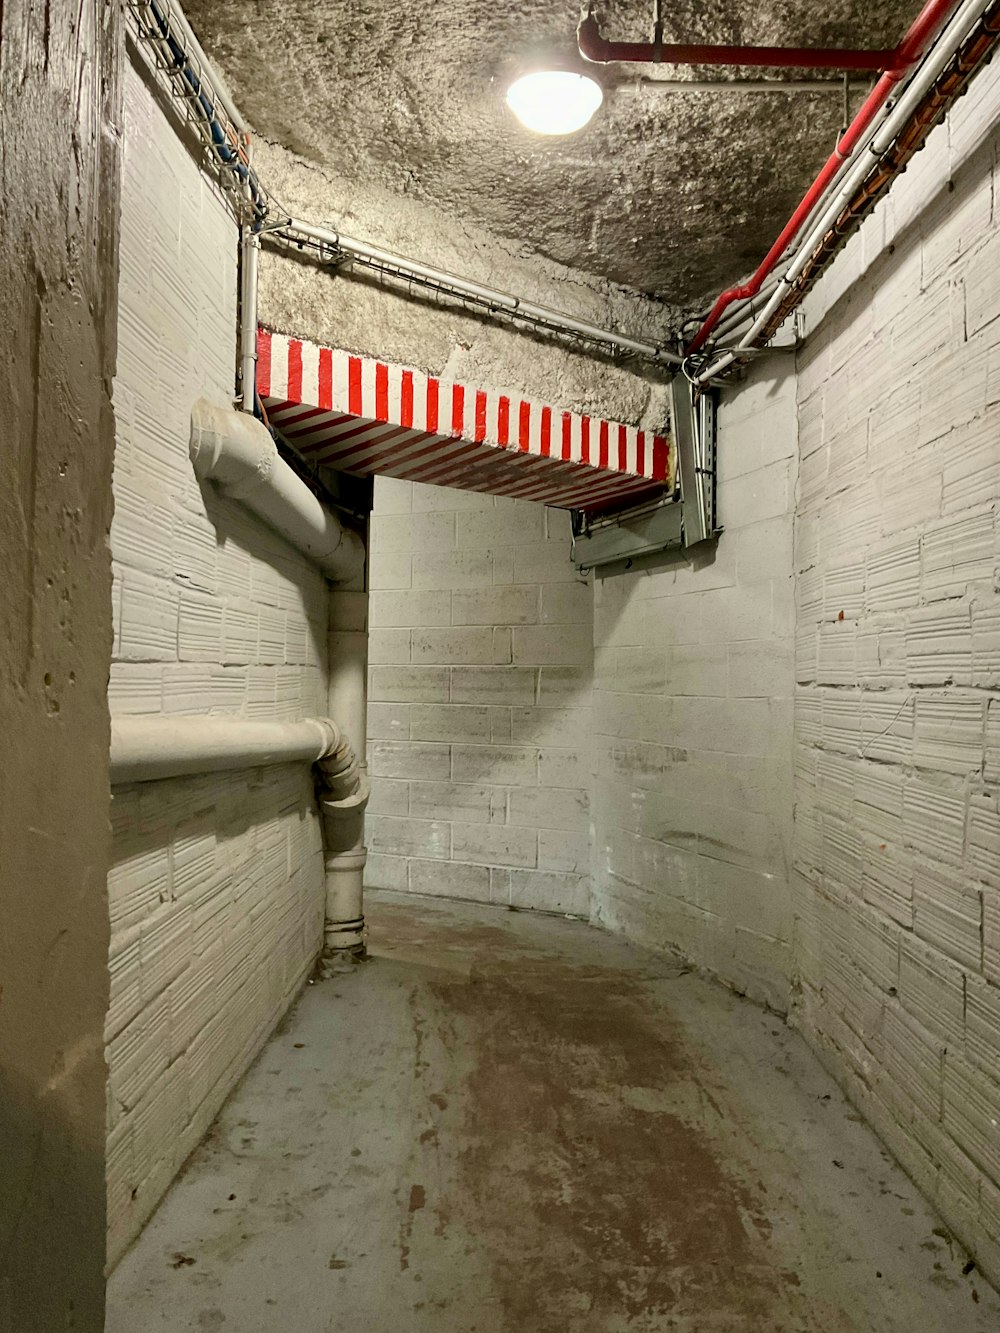 a long narrow room with a red and white striped awning